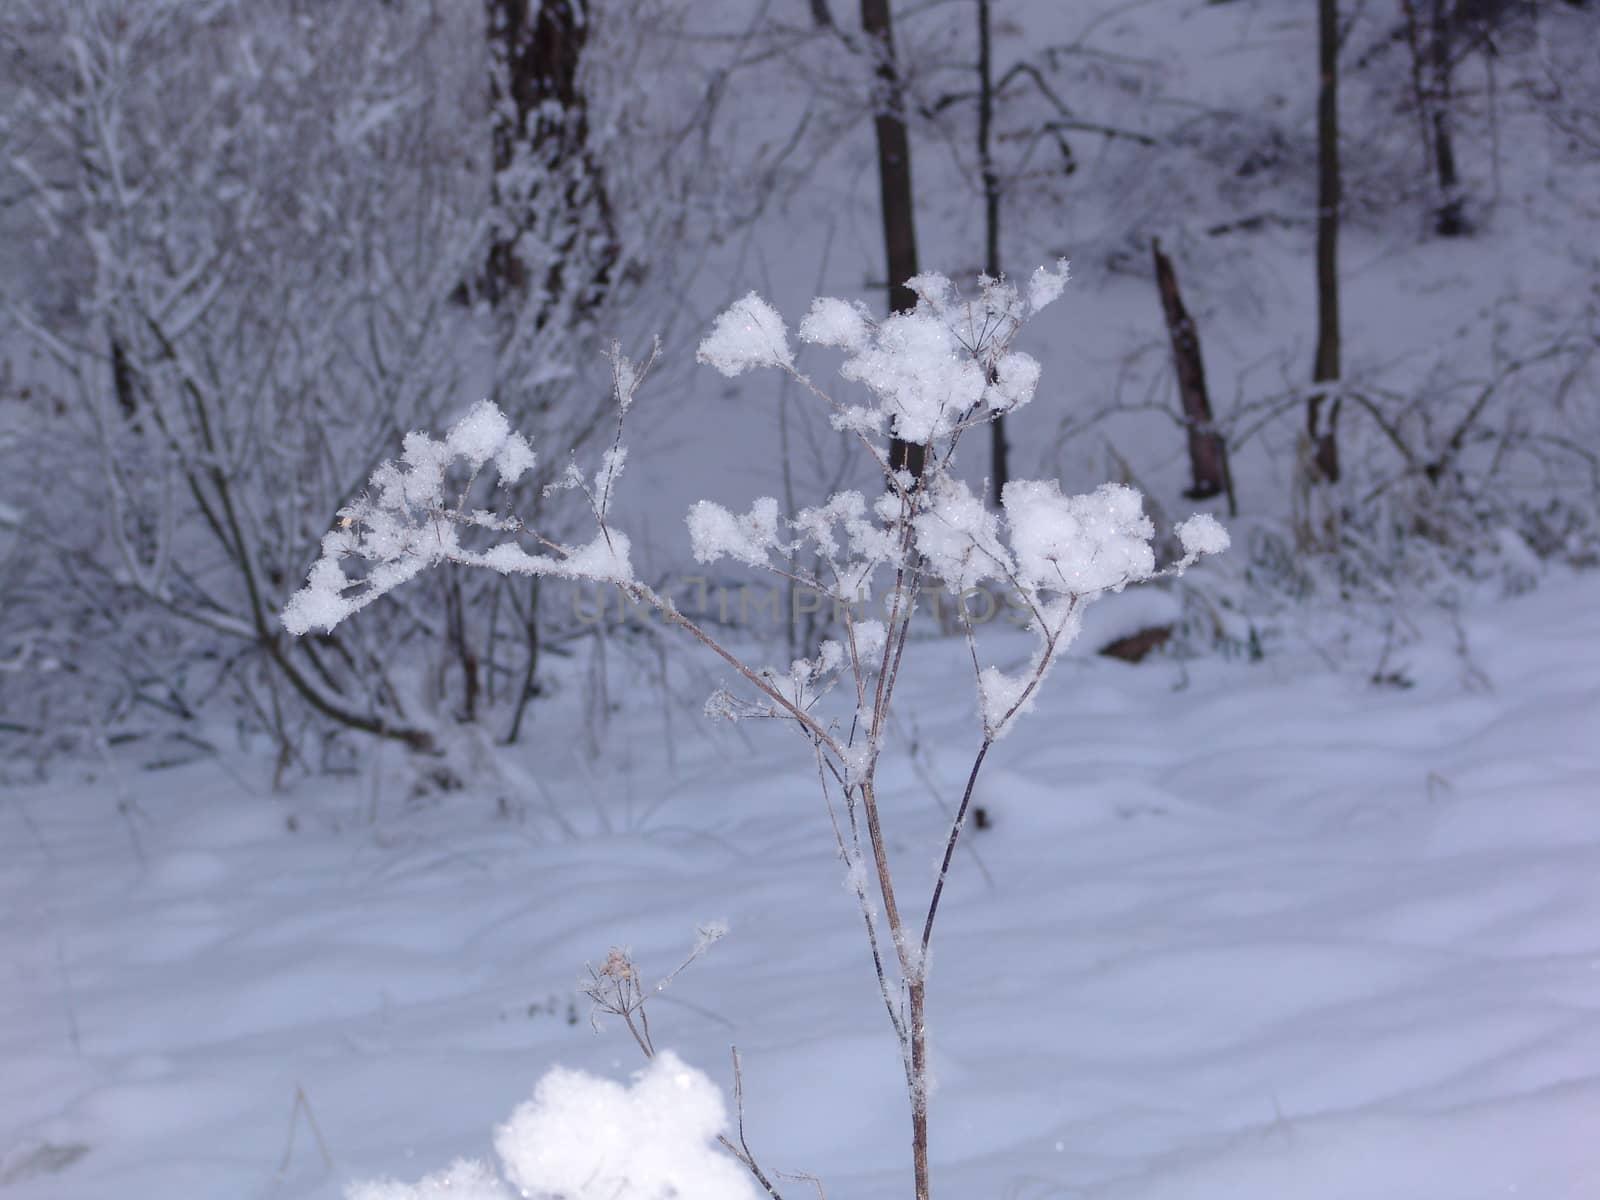 Bushes in winter forest